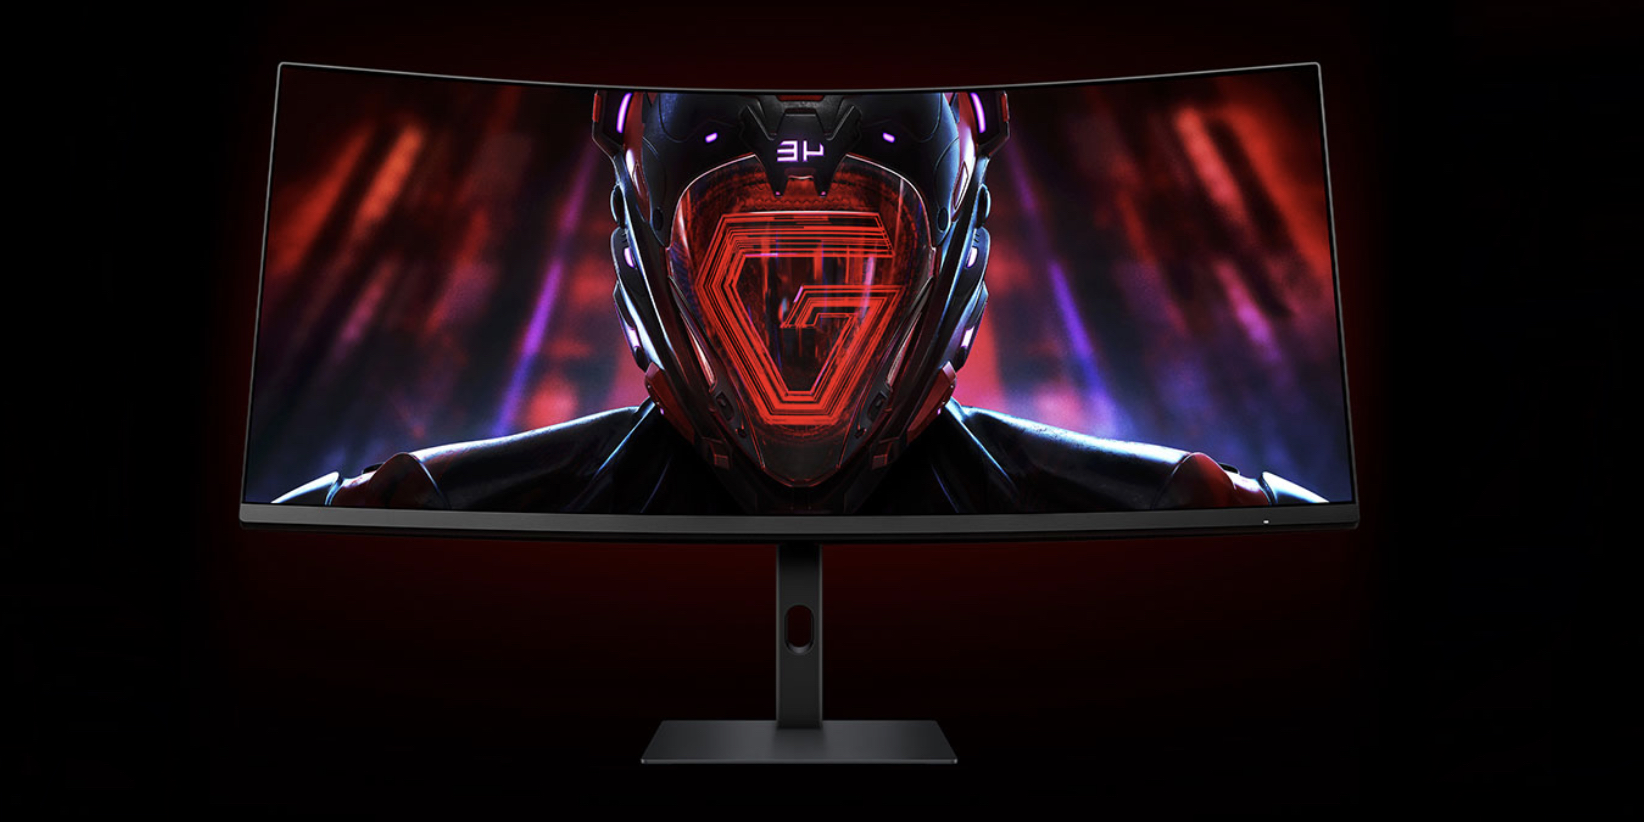 Xiaomi has released a low-cost curved monitor Redmi G34WQ for gamers